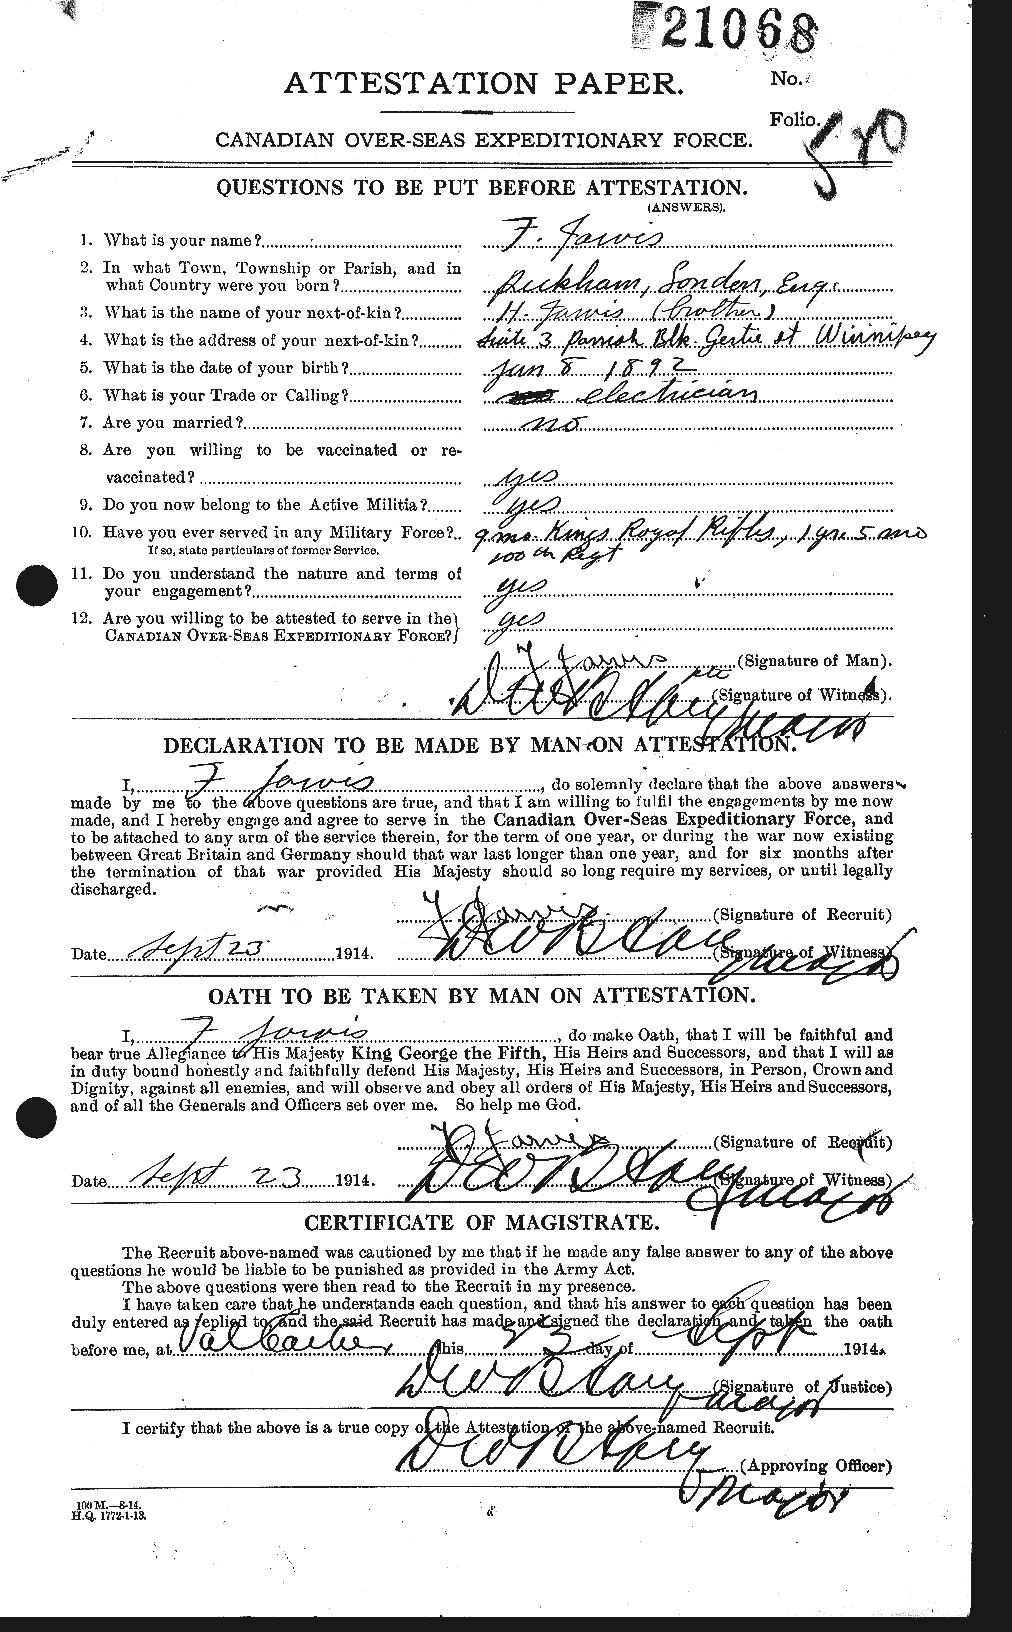 Personnel Records of the First World War - CEF 414682a